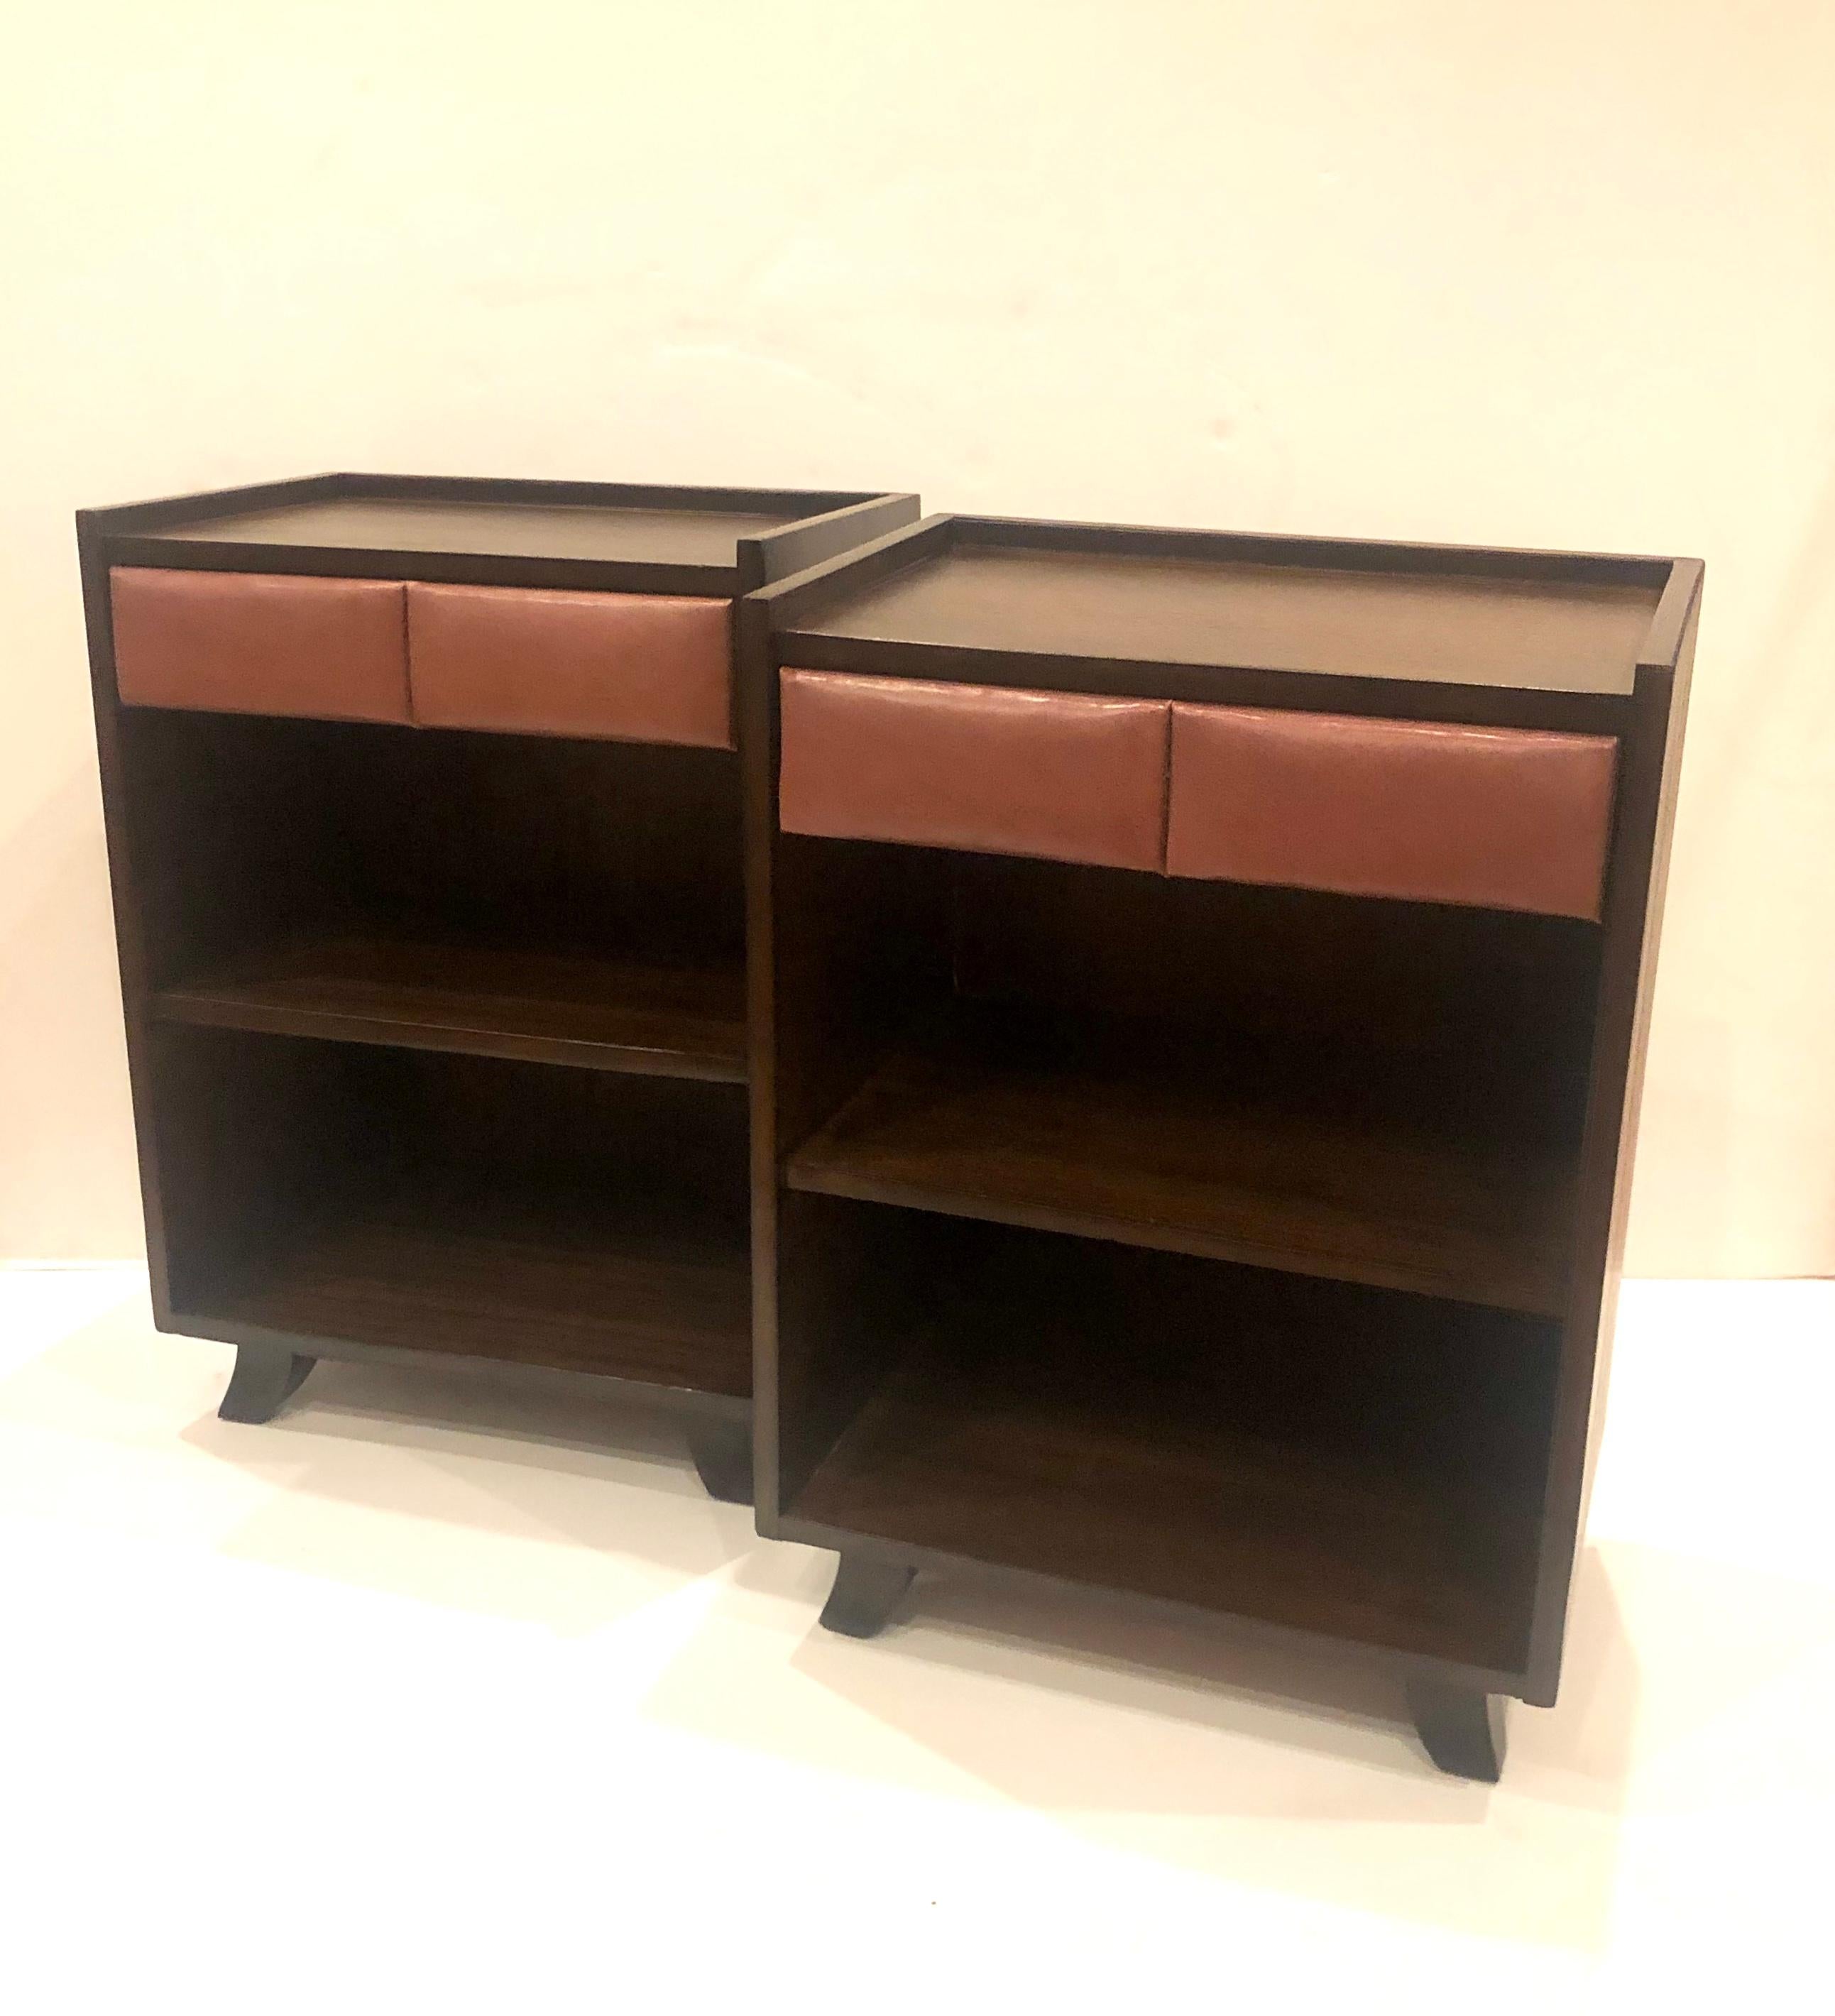 Rare pair of night stands design by Gilbert Rohde for Herman Miller, circa 1940s freshly refinished in chocolate mahogany finish retains its original Naugahyde upholstered front drawer, these pair are simple elegant and practical a perfect example